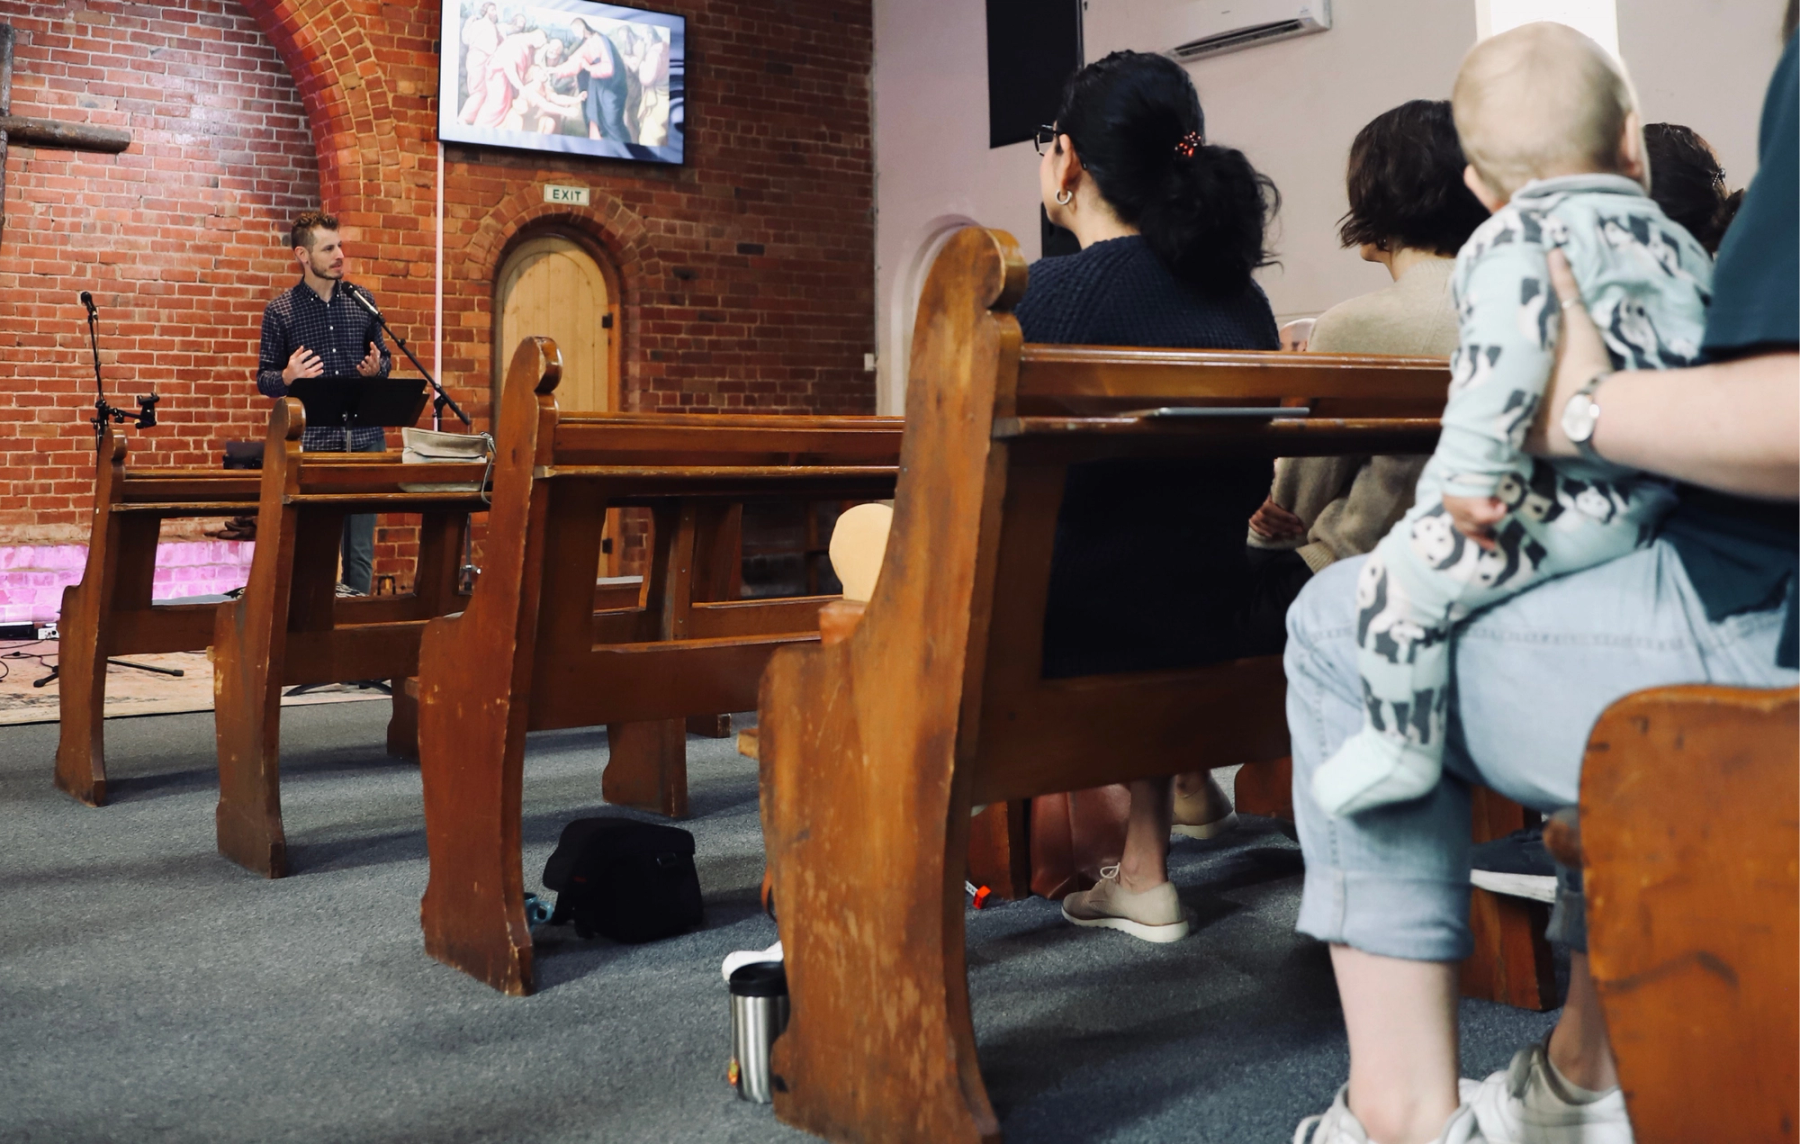 A group of people sitting in a church building listening to a preacher.